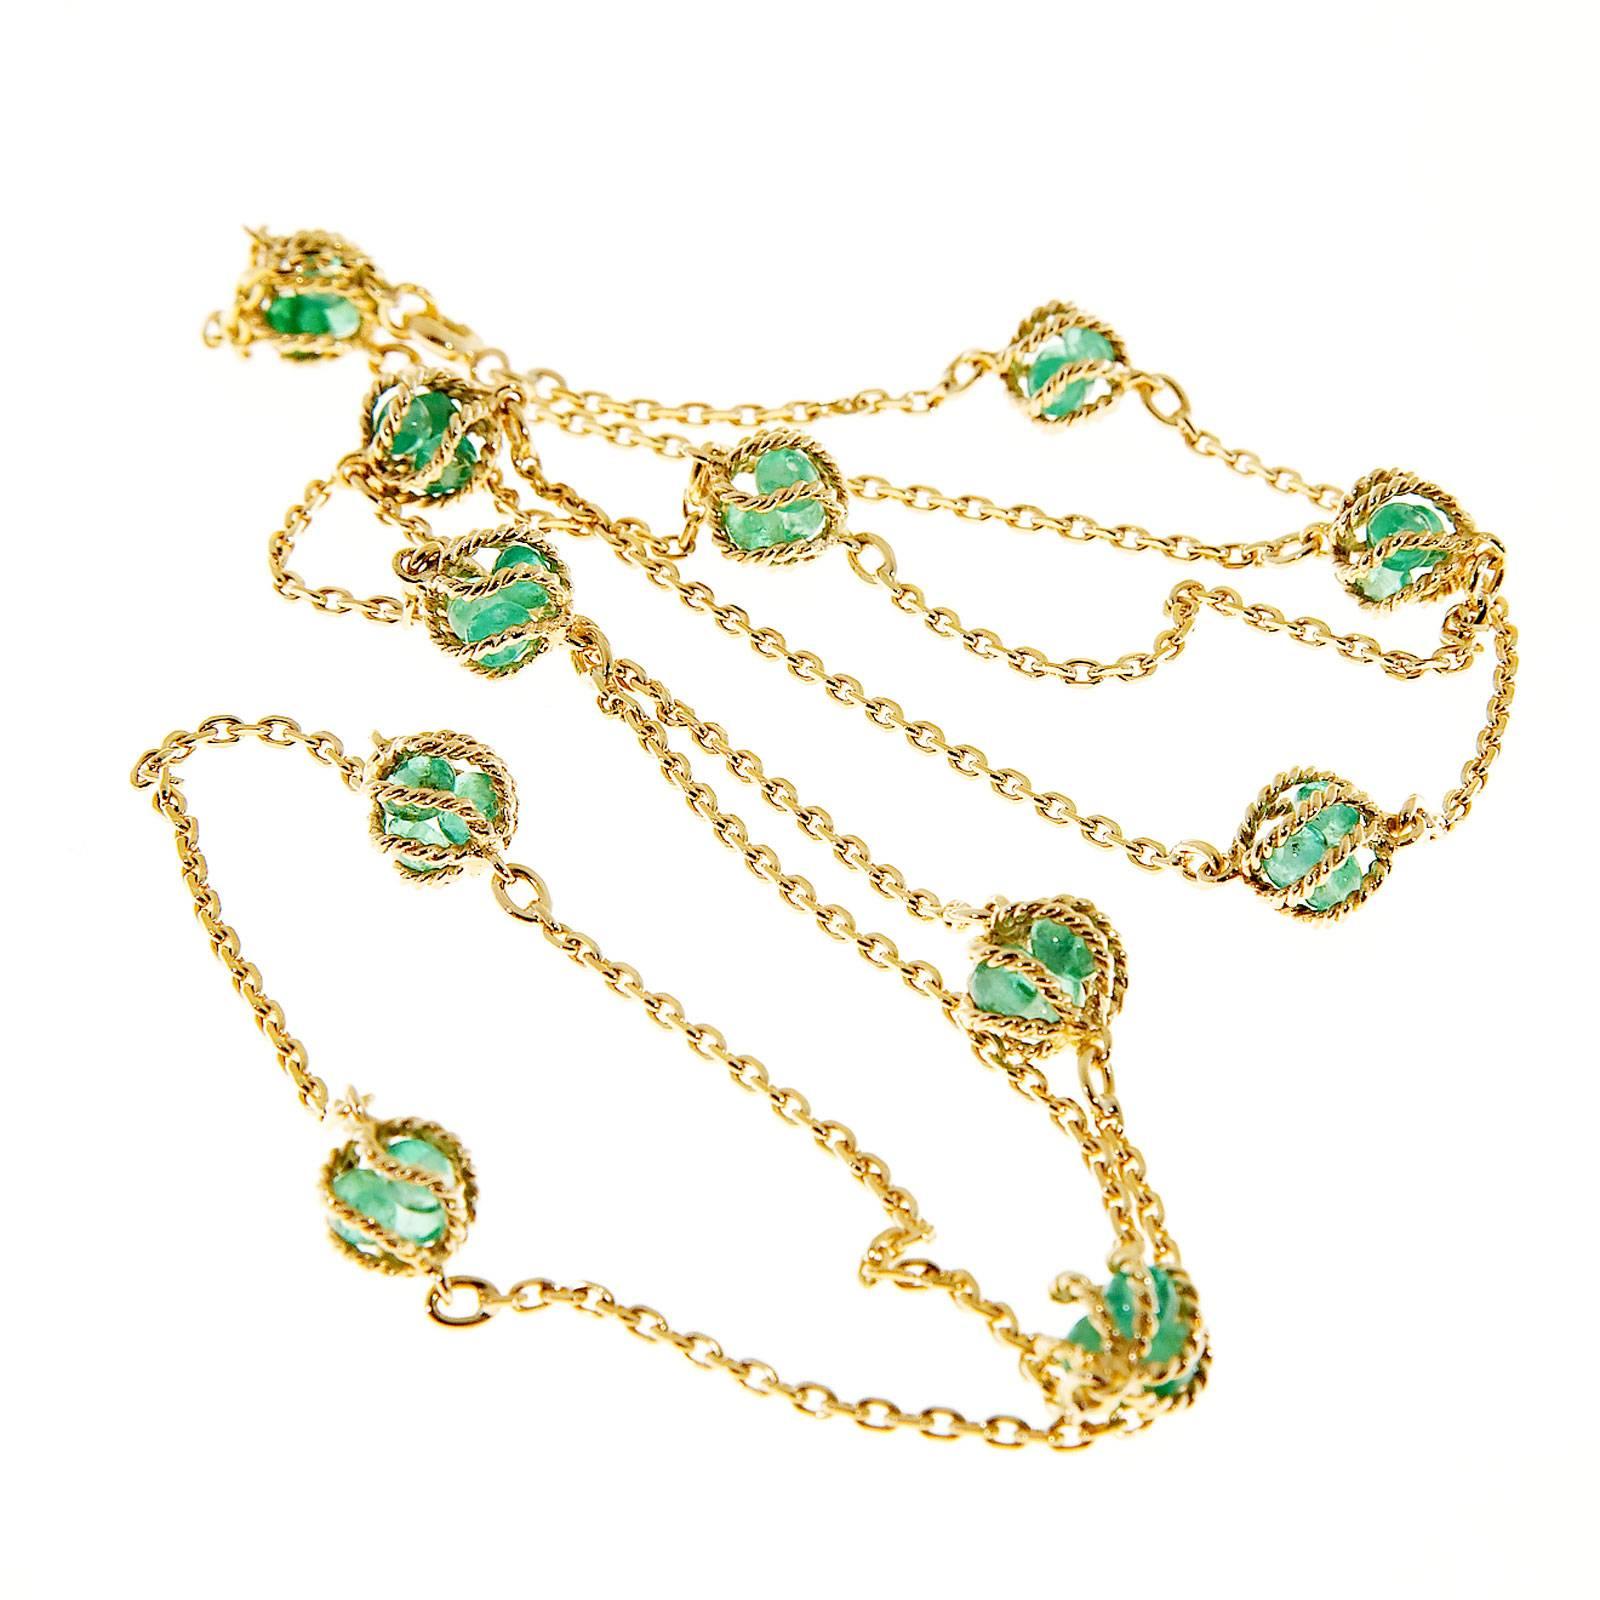 Mellerio Meller Emerald By The Yard Gold Chain Necklace 1